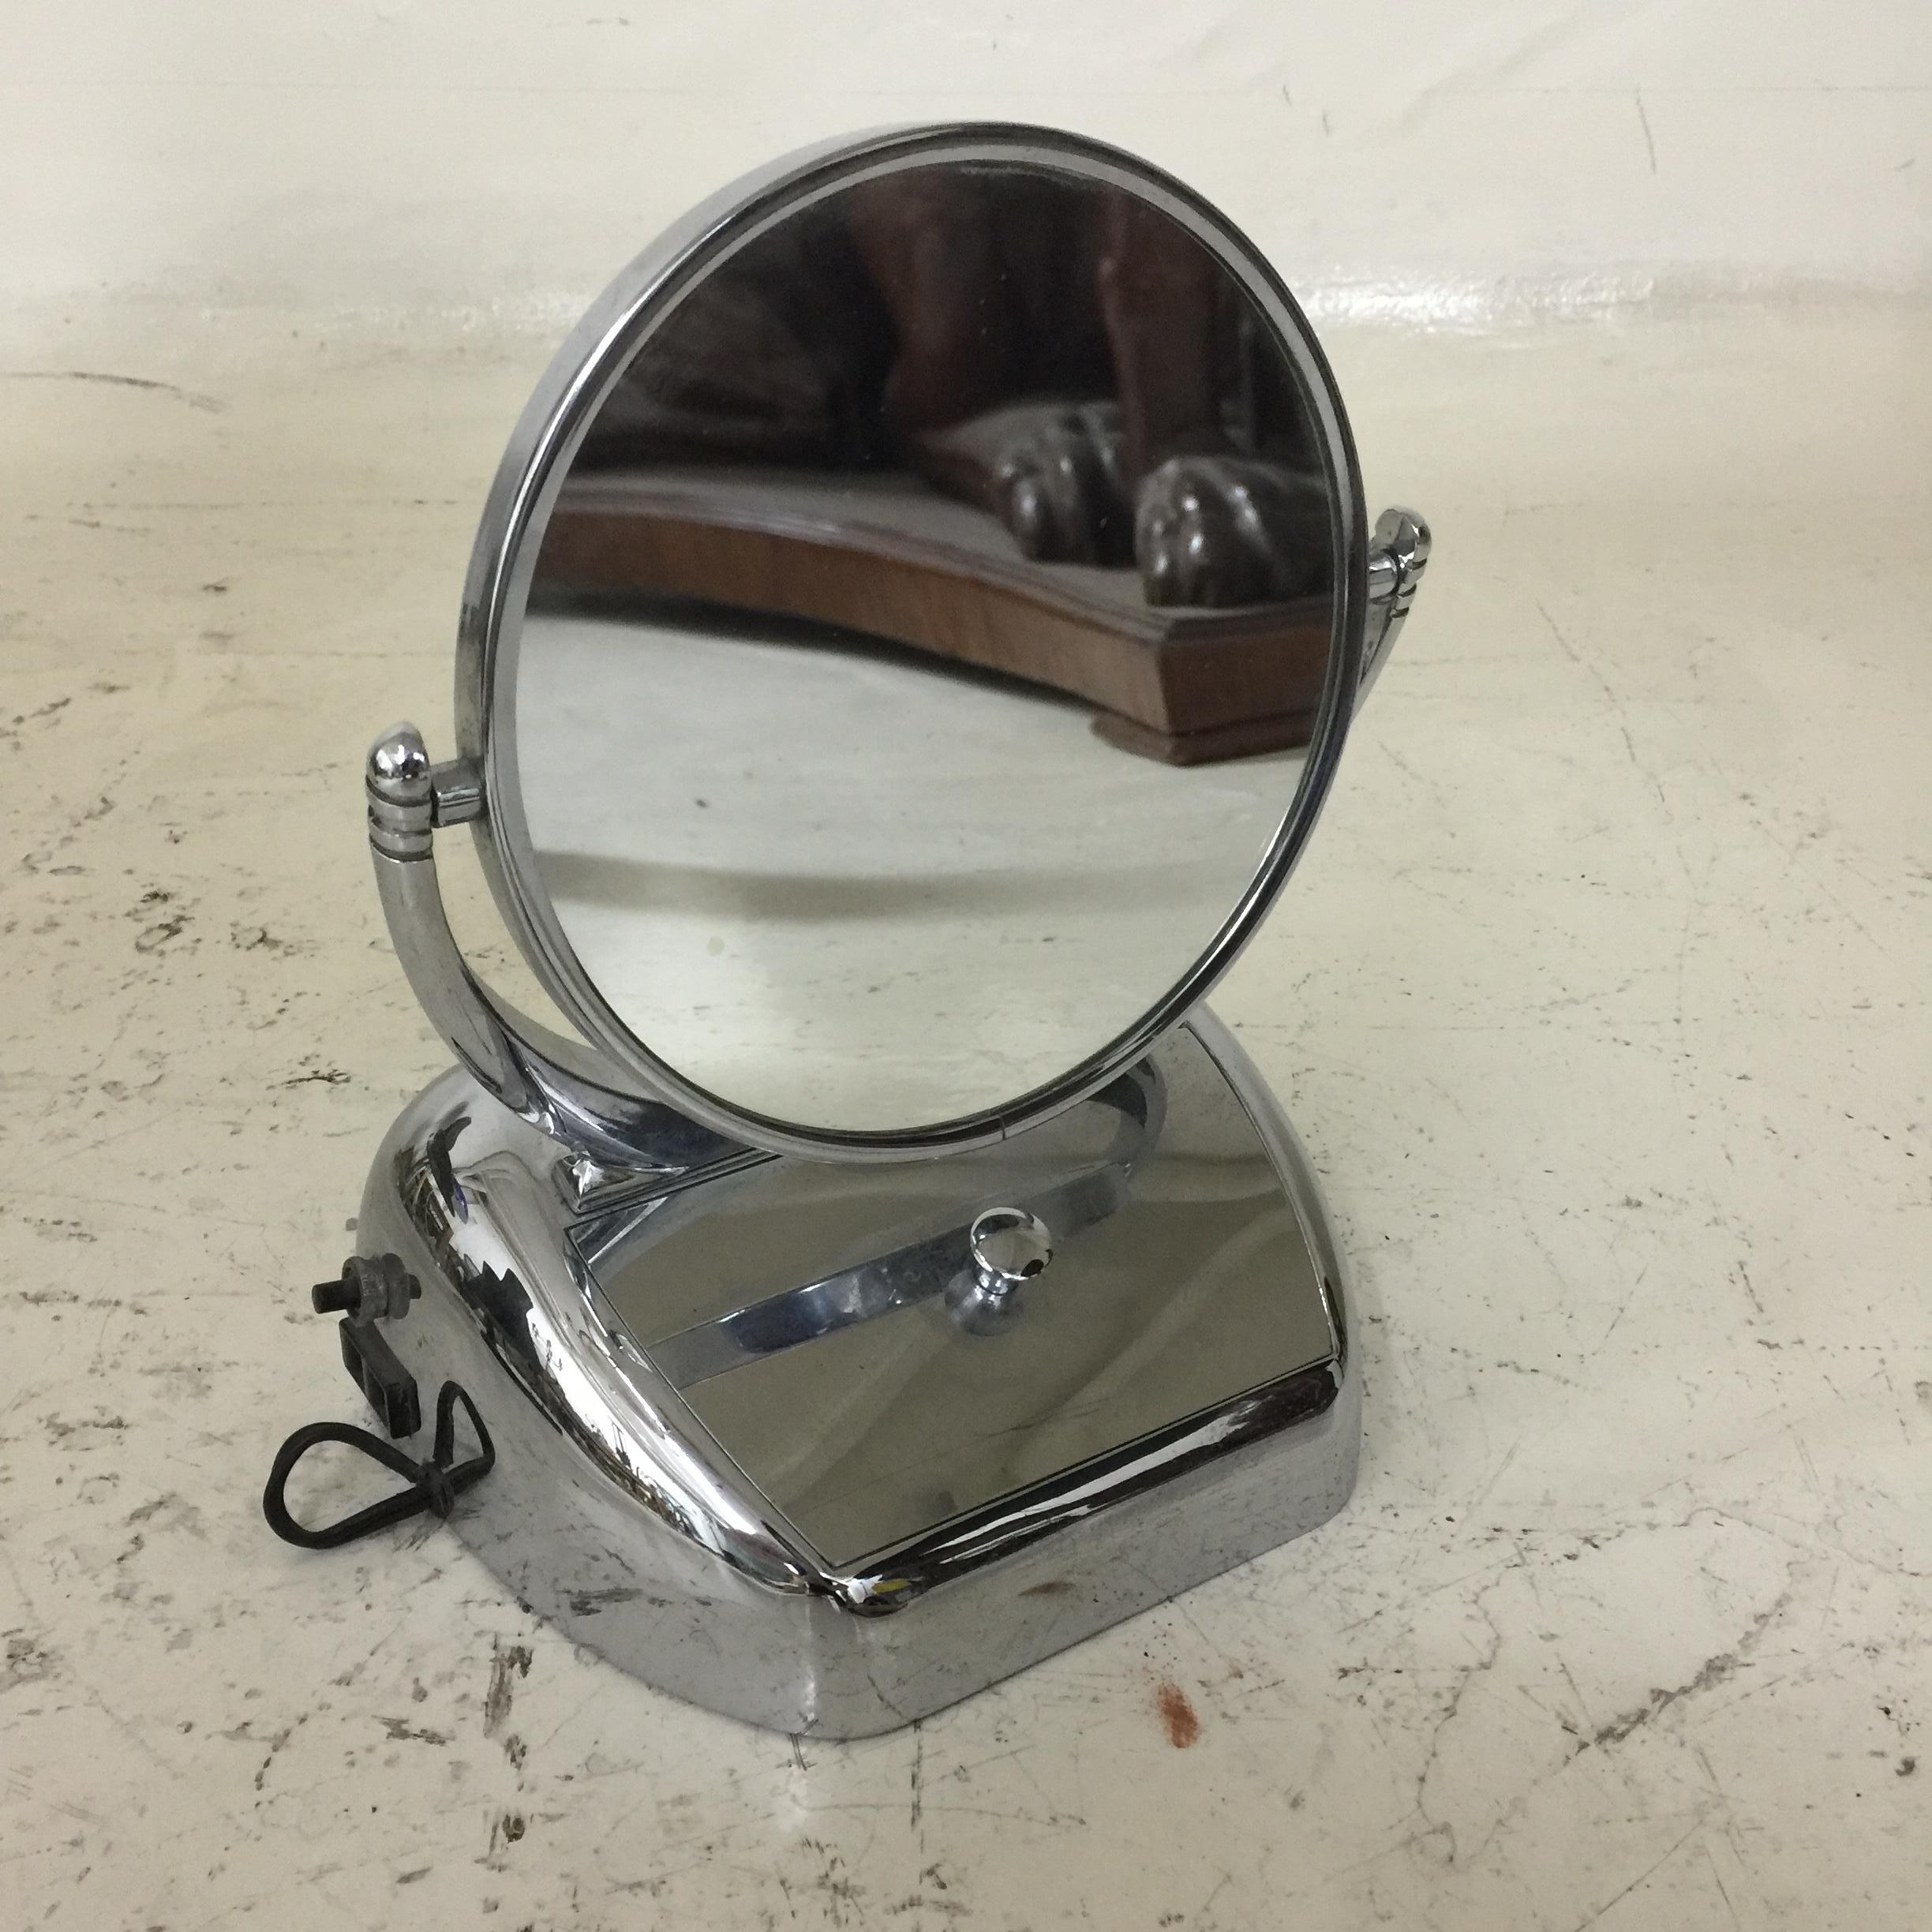 Mirror Art Deco with light and with storage space

Chrome and Mirror
We have specialized in the sale of Art Deco and Art Nouveau and Vintage styles since 1982. If you have any questions we are at your disposal.
Pushing the button that reads